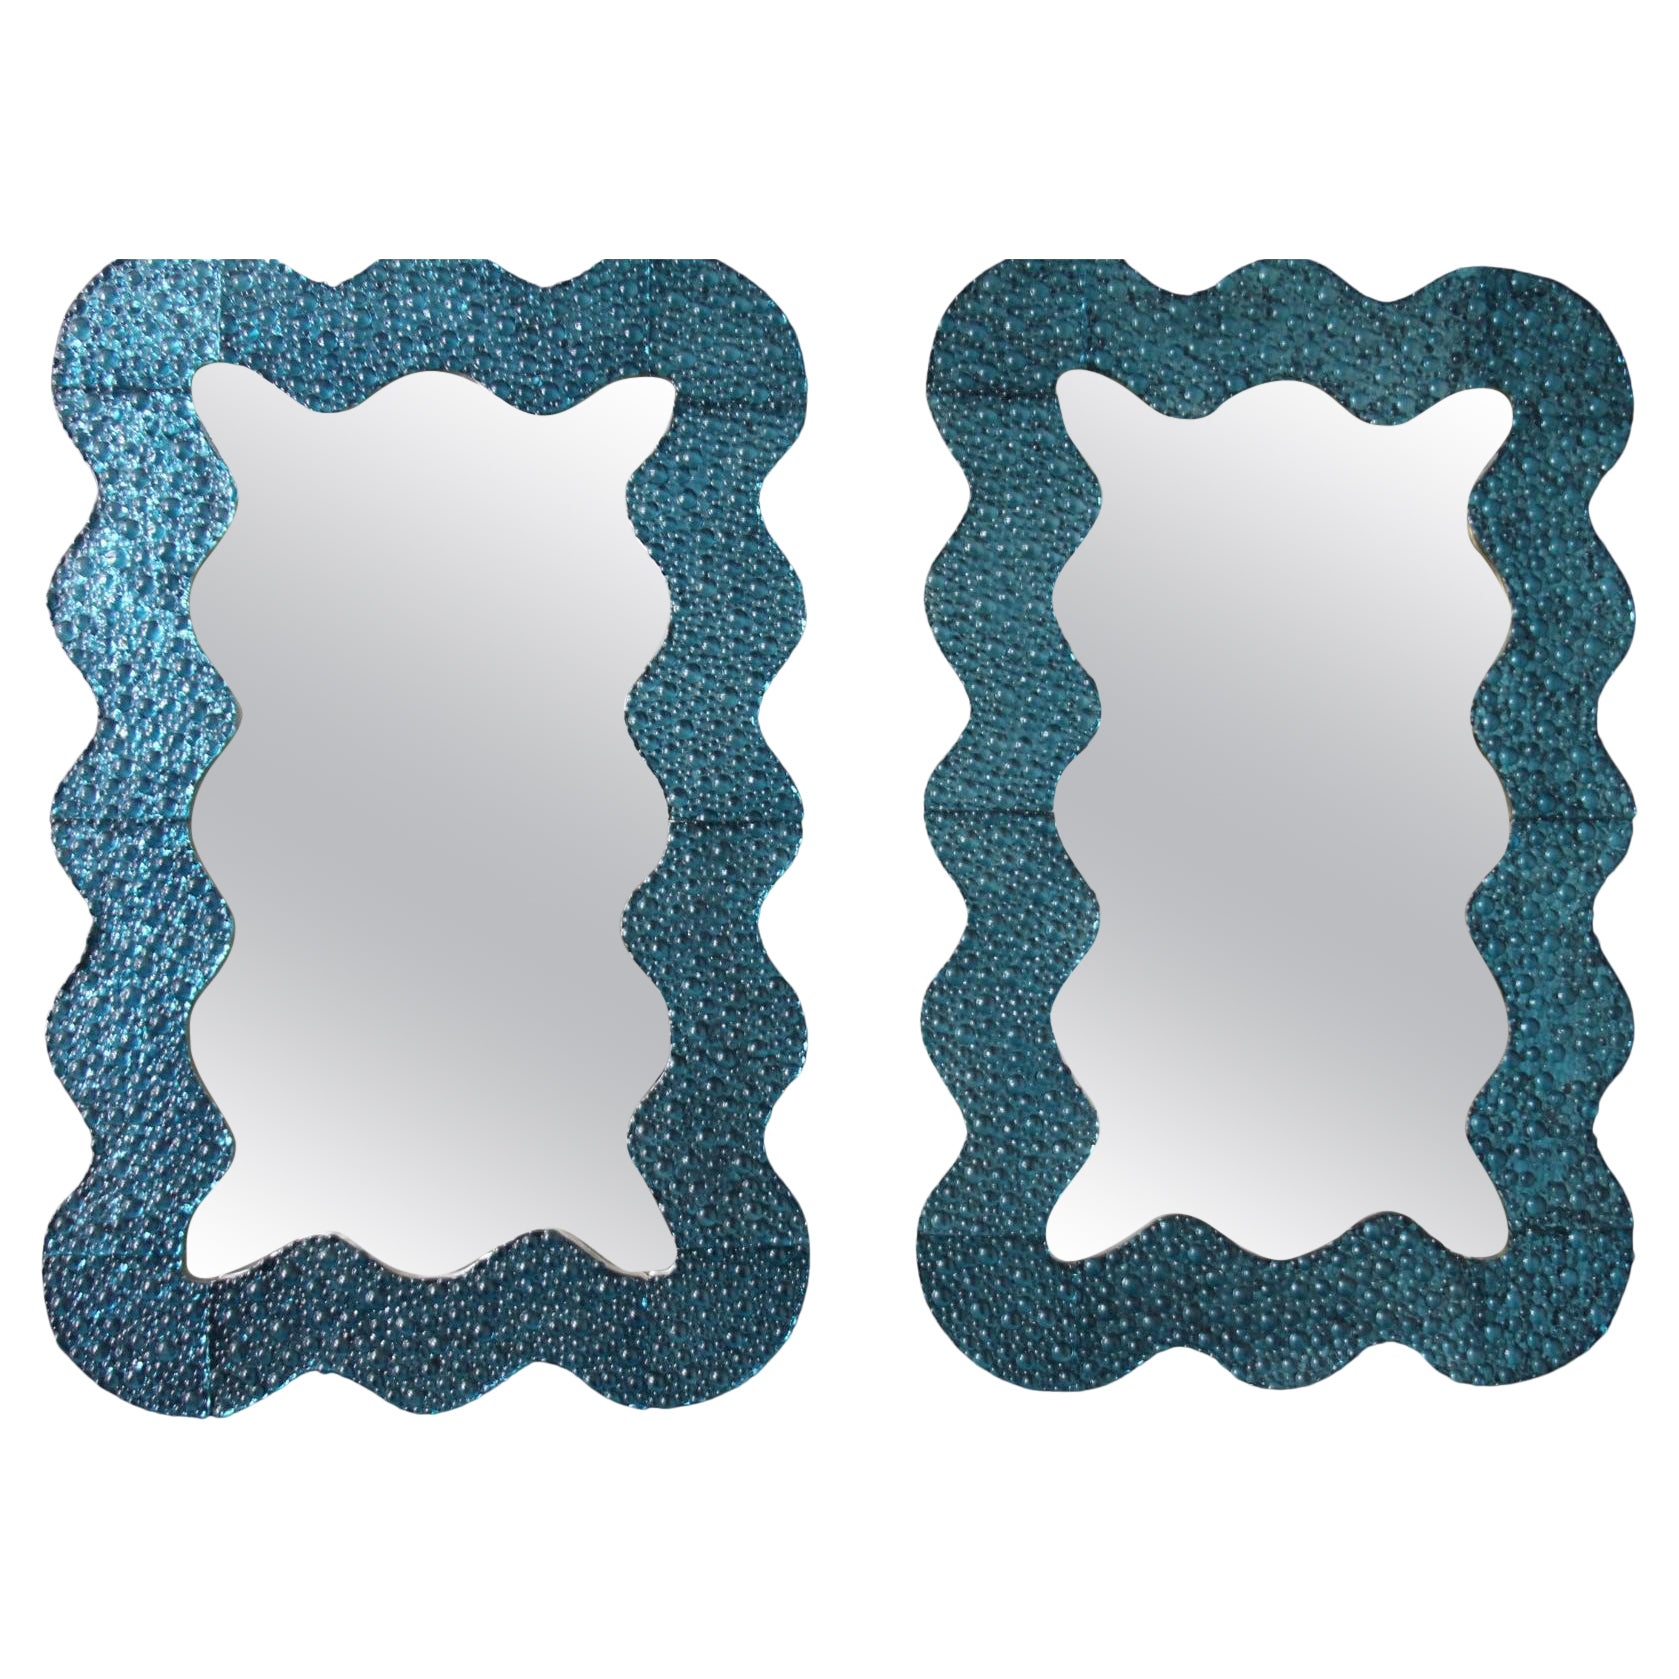 Large Wavy Turquoise Blue Textured Murano Glass Mirrors , In Stock